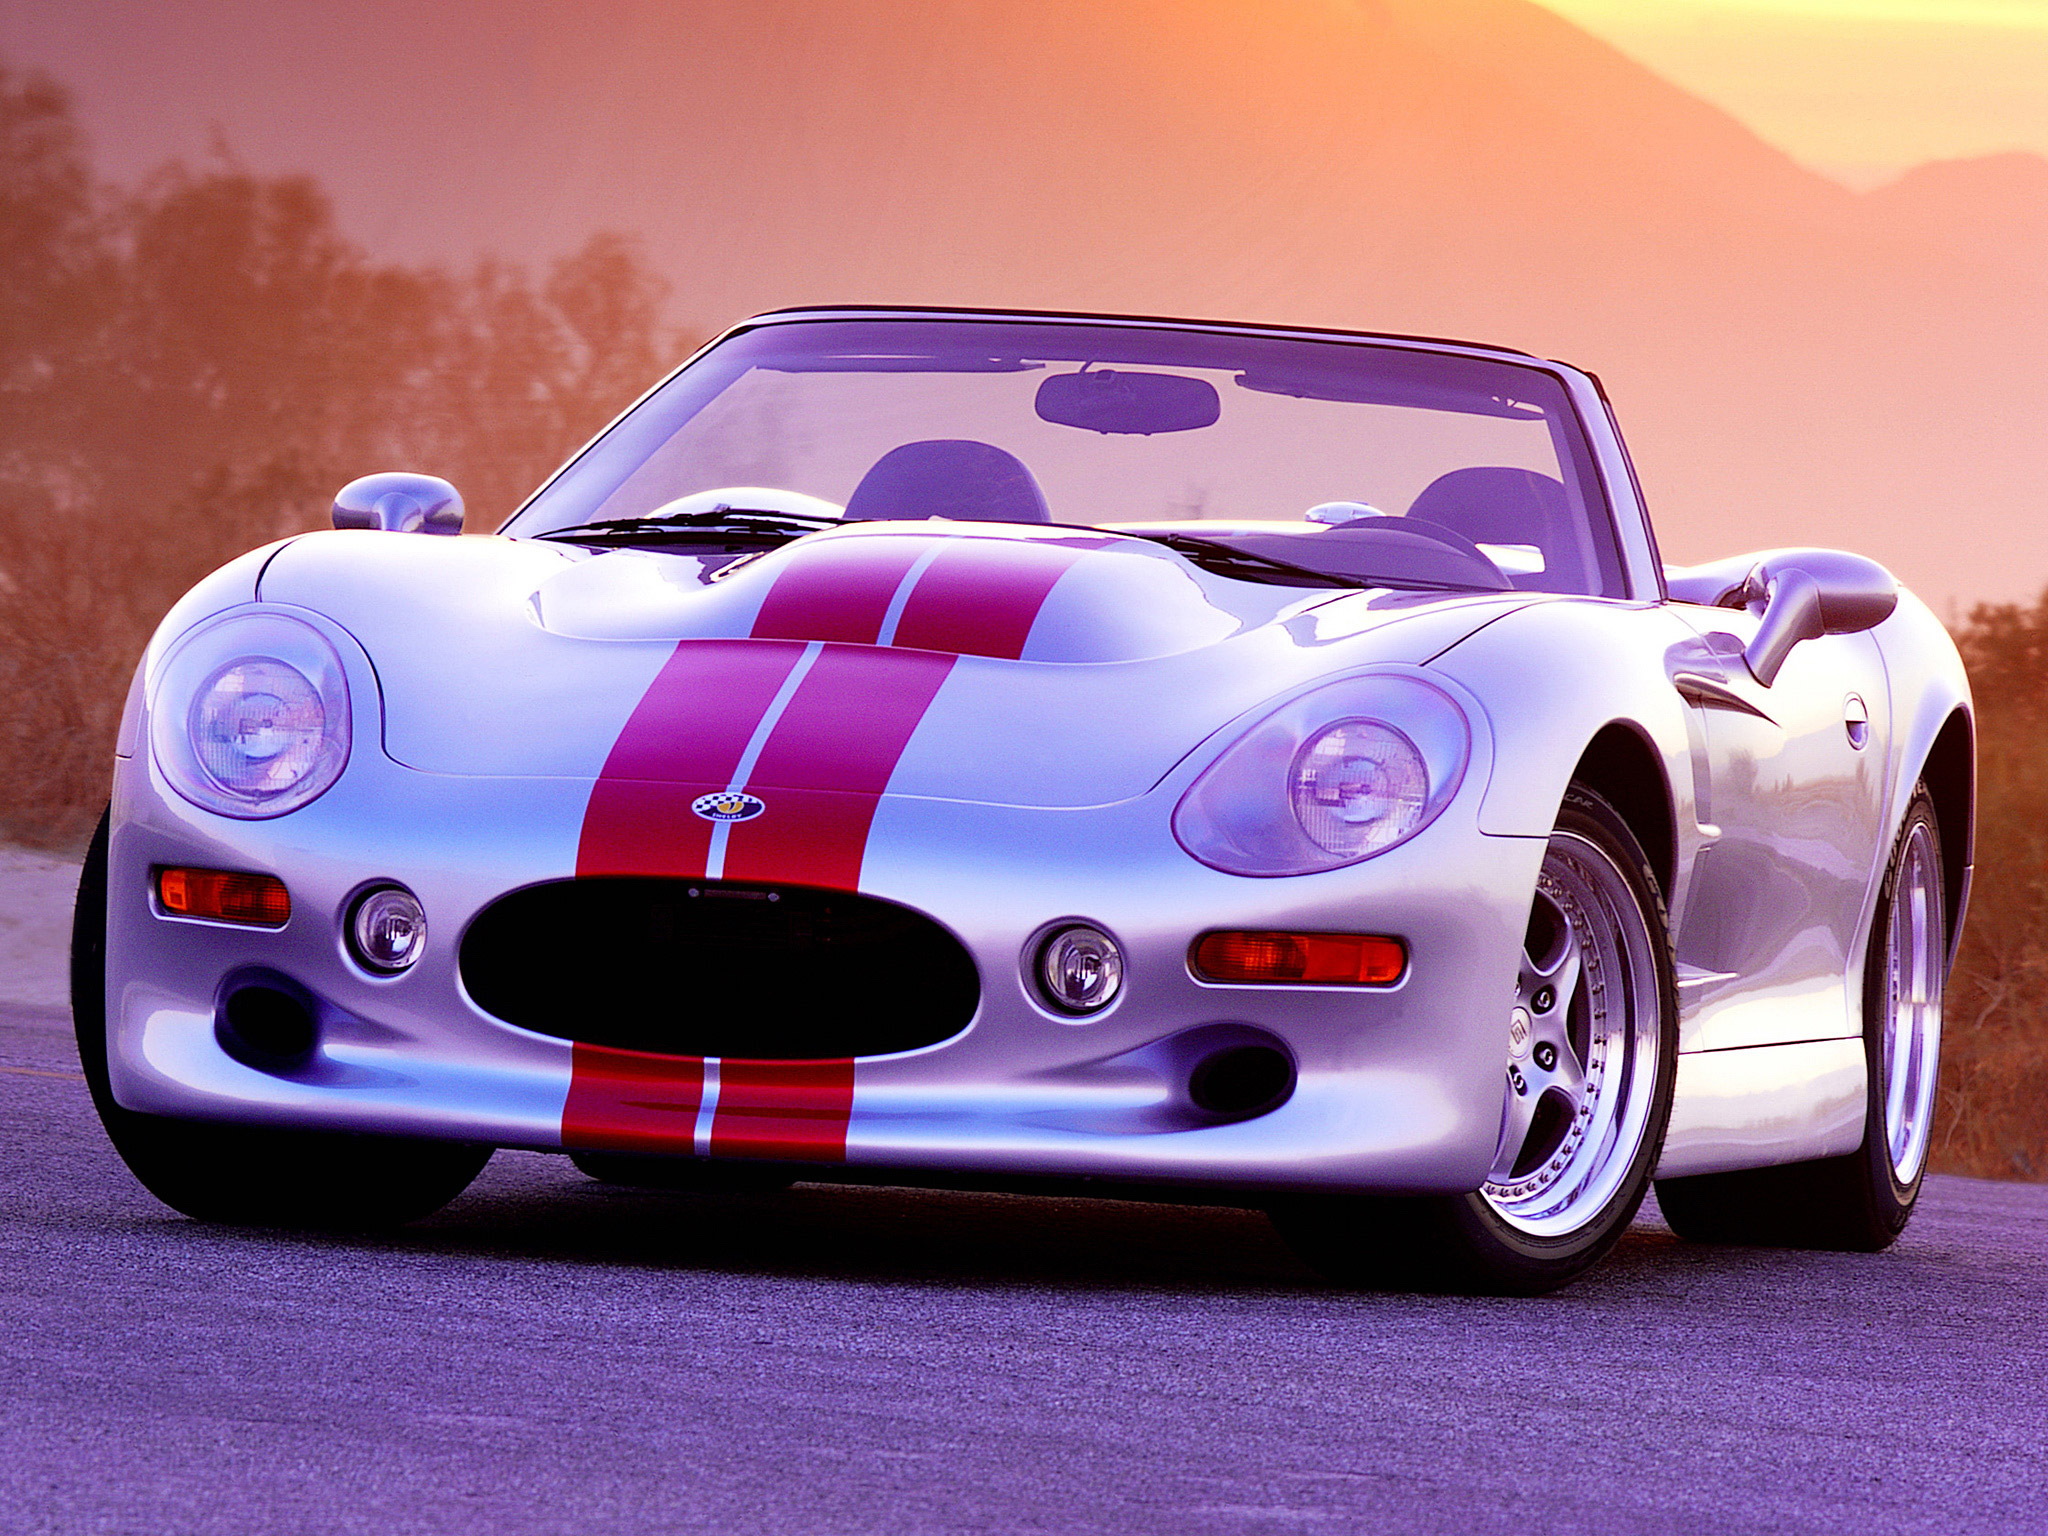  1999 Shelby Series 1 Wallpaper.